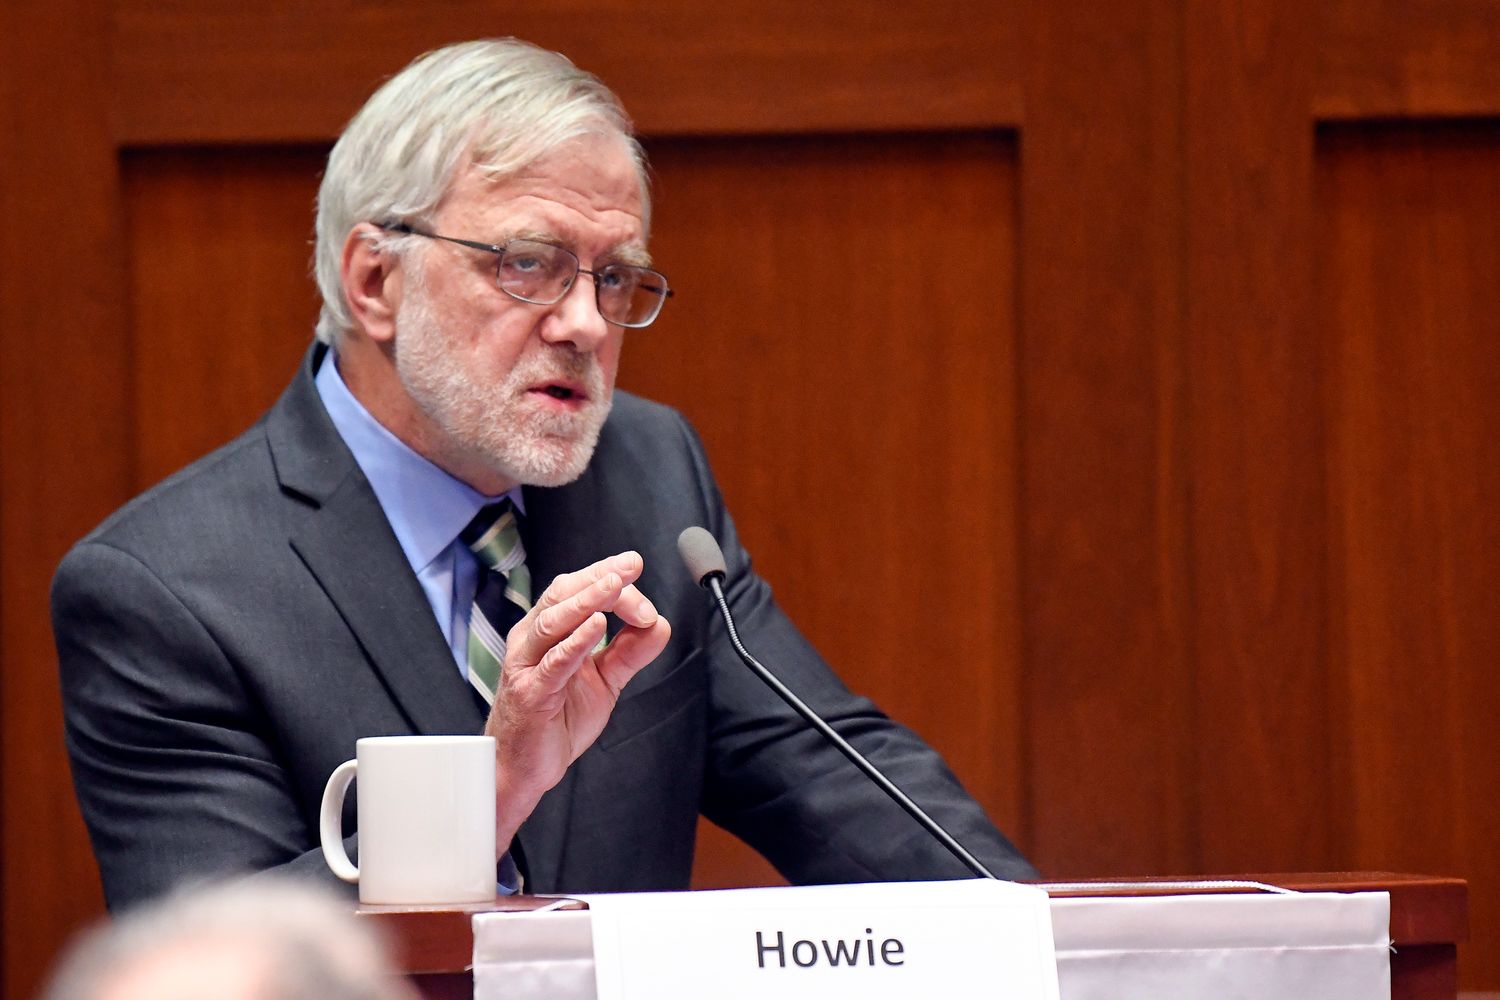 Showing Eco-Socialist and Green Party candidate Howie Hawkins